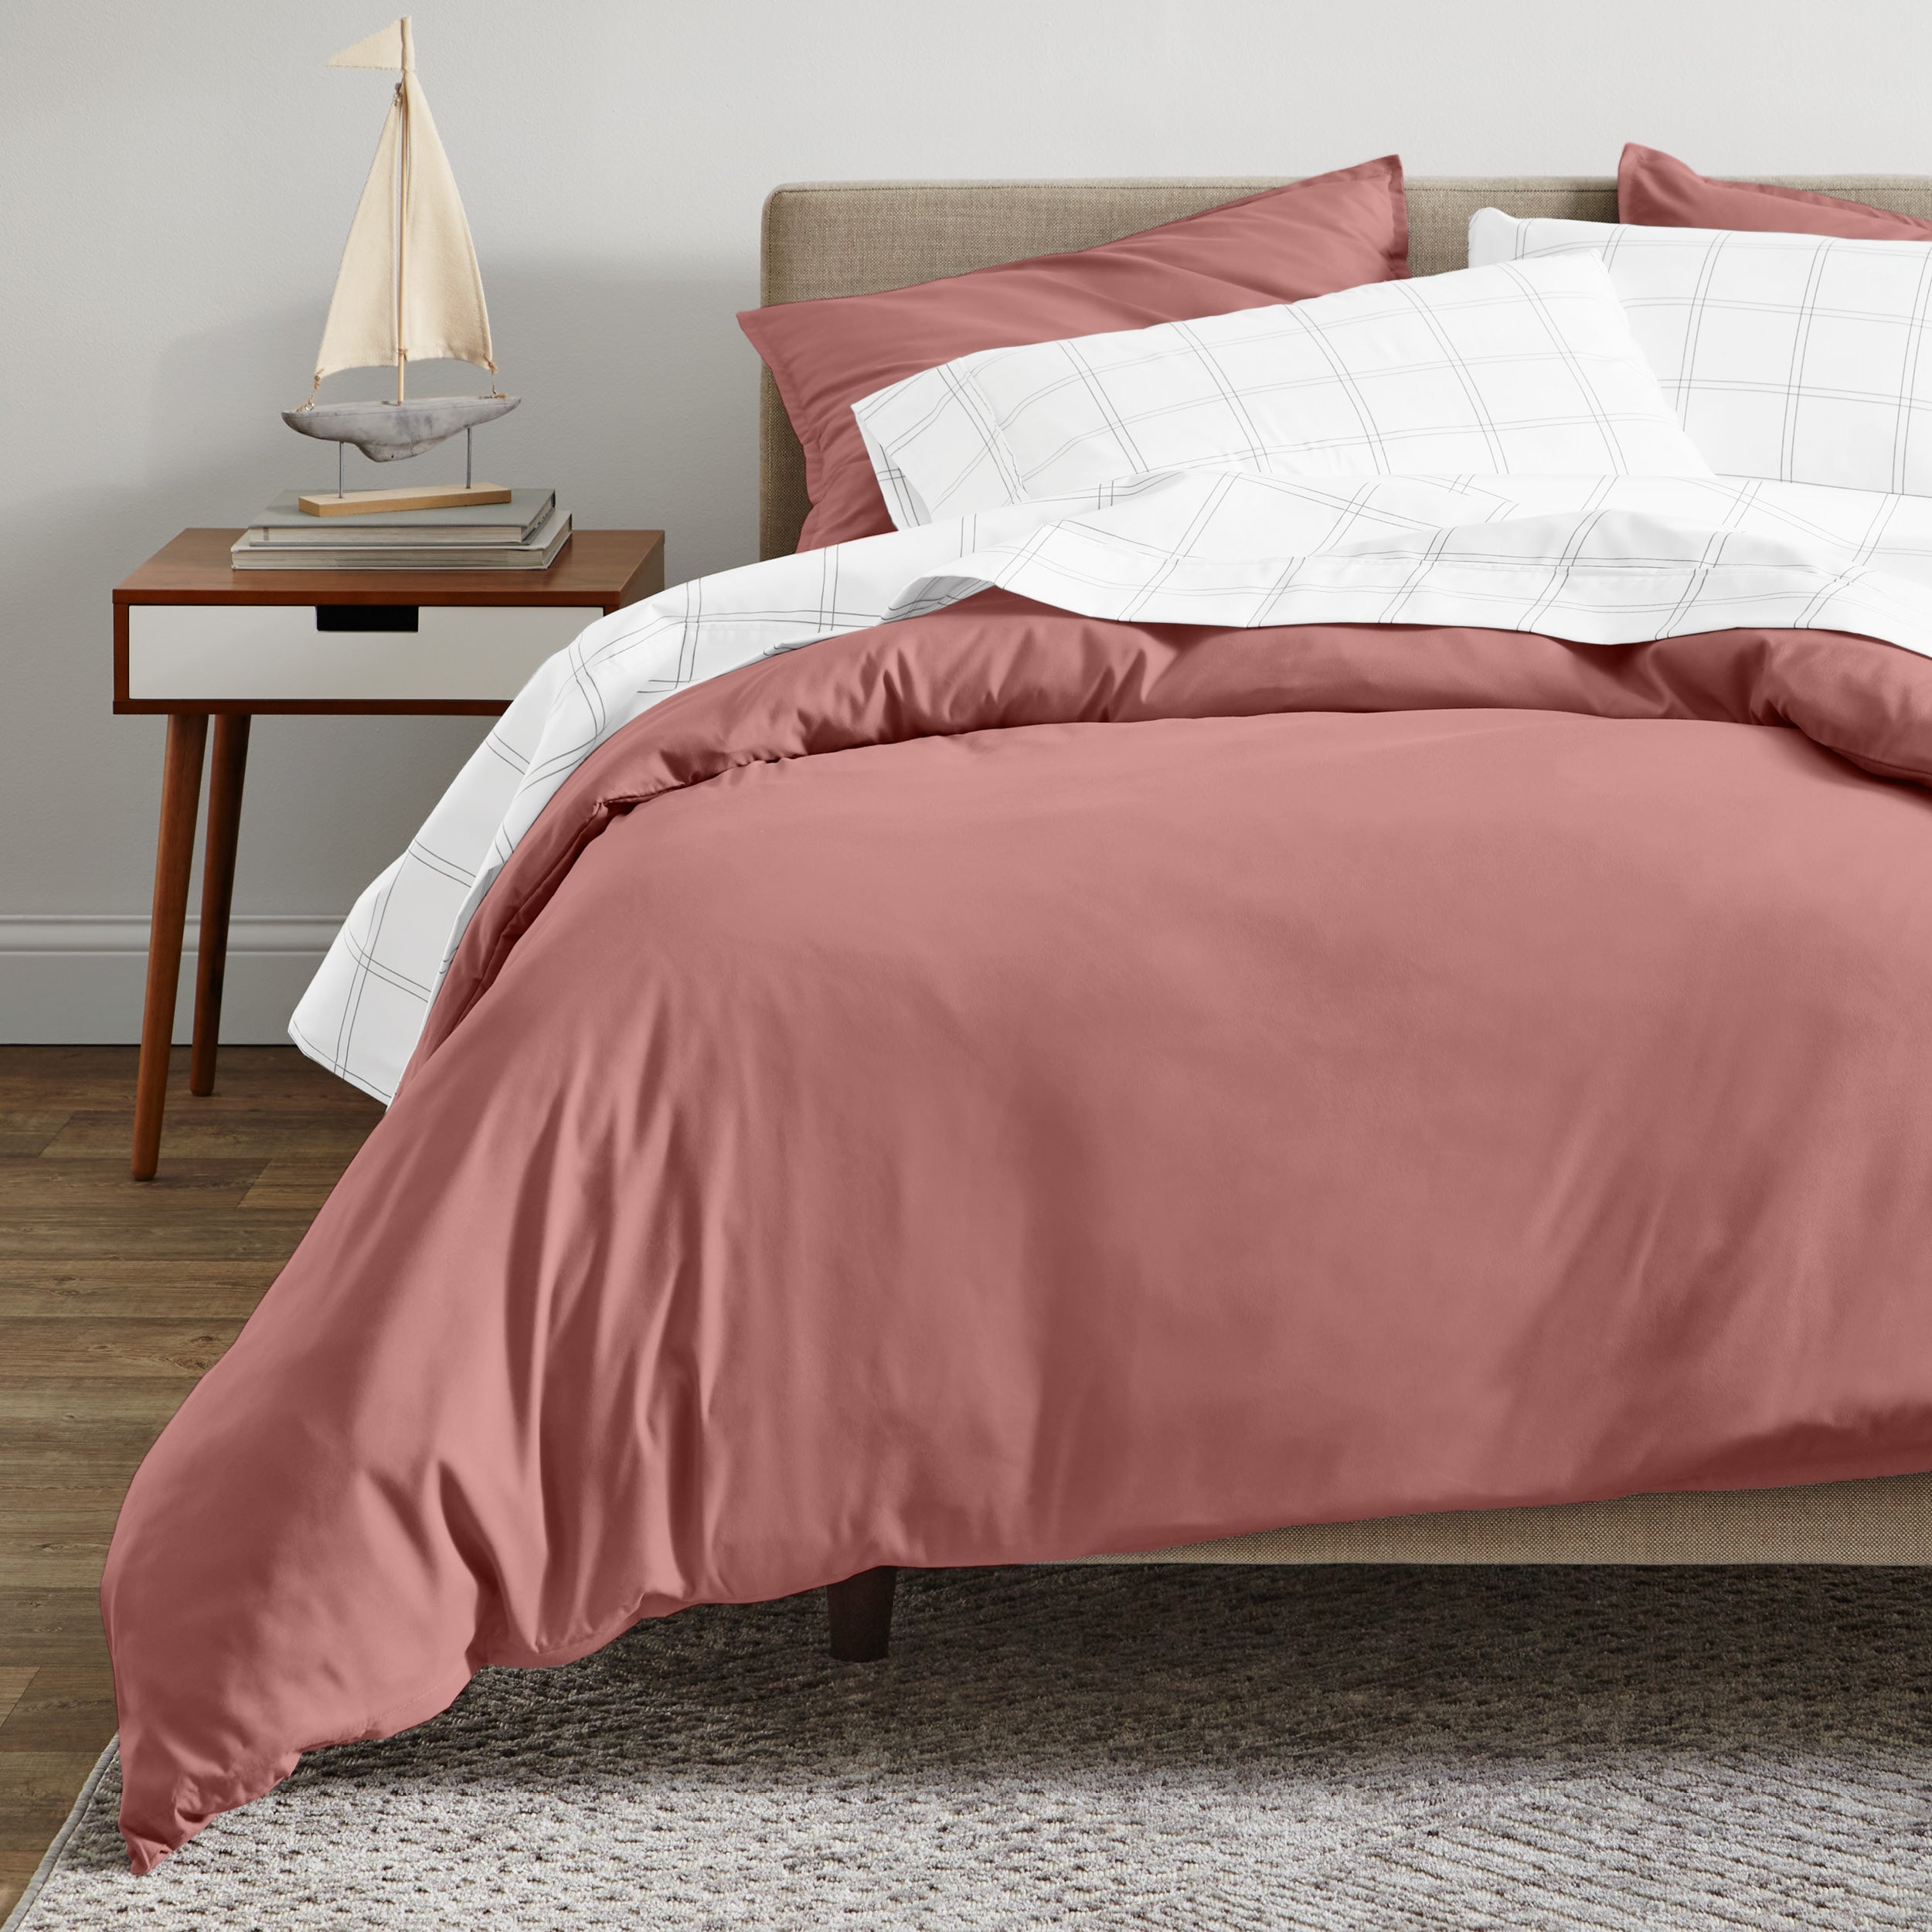 A modern bed with an organic sateen duvet cover set on.